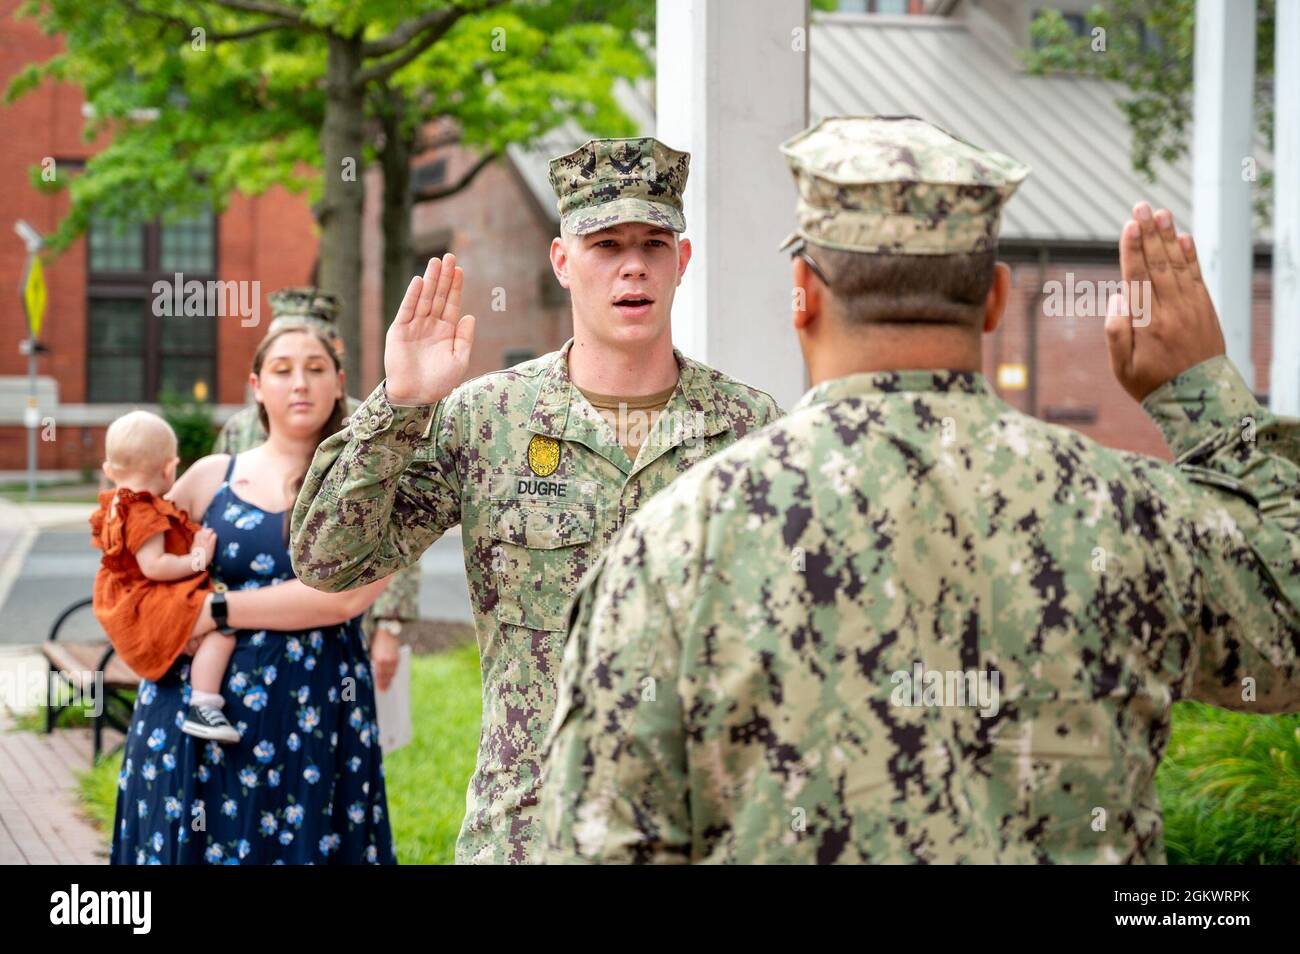 WASHINGTON, DC (July 12, 2021) – Master-at-Arms 2nd Class Tyrell Dugre, center, recites the oath of enlistment onboard Washington Navy Yard. Stock Photo